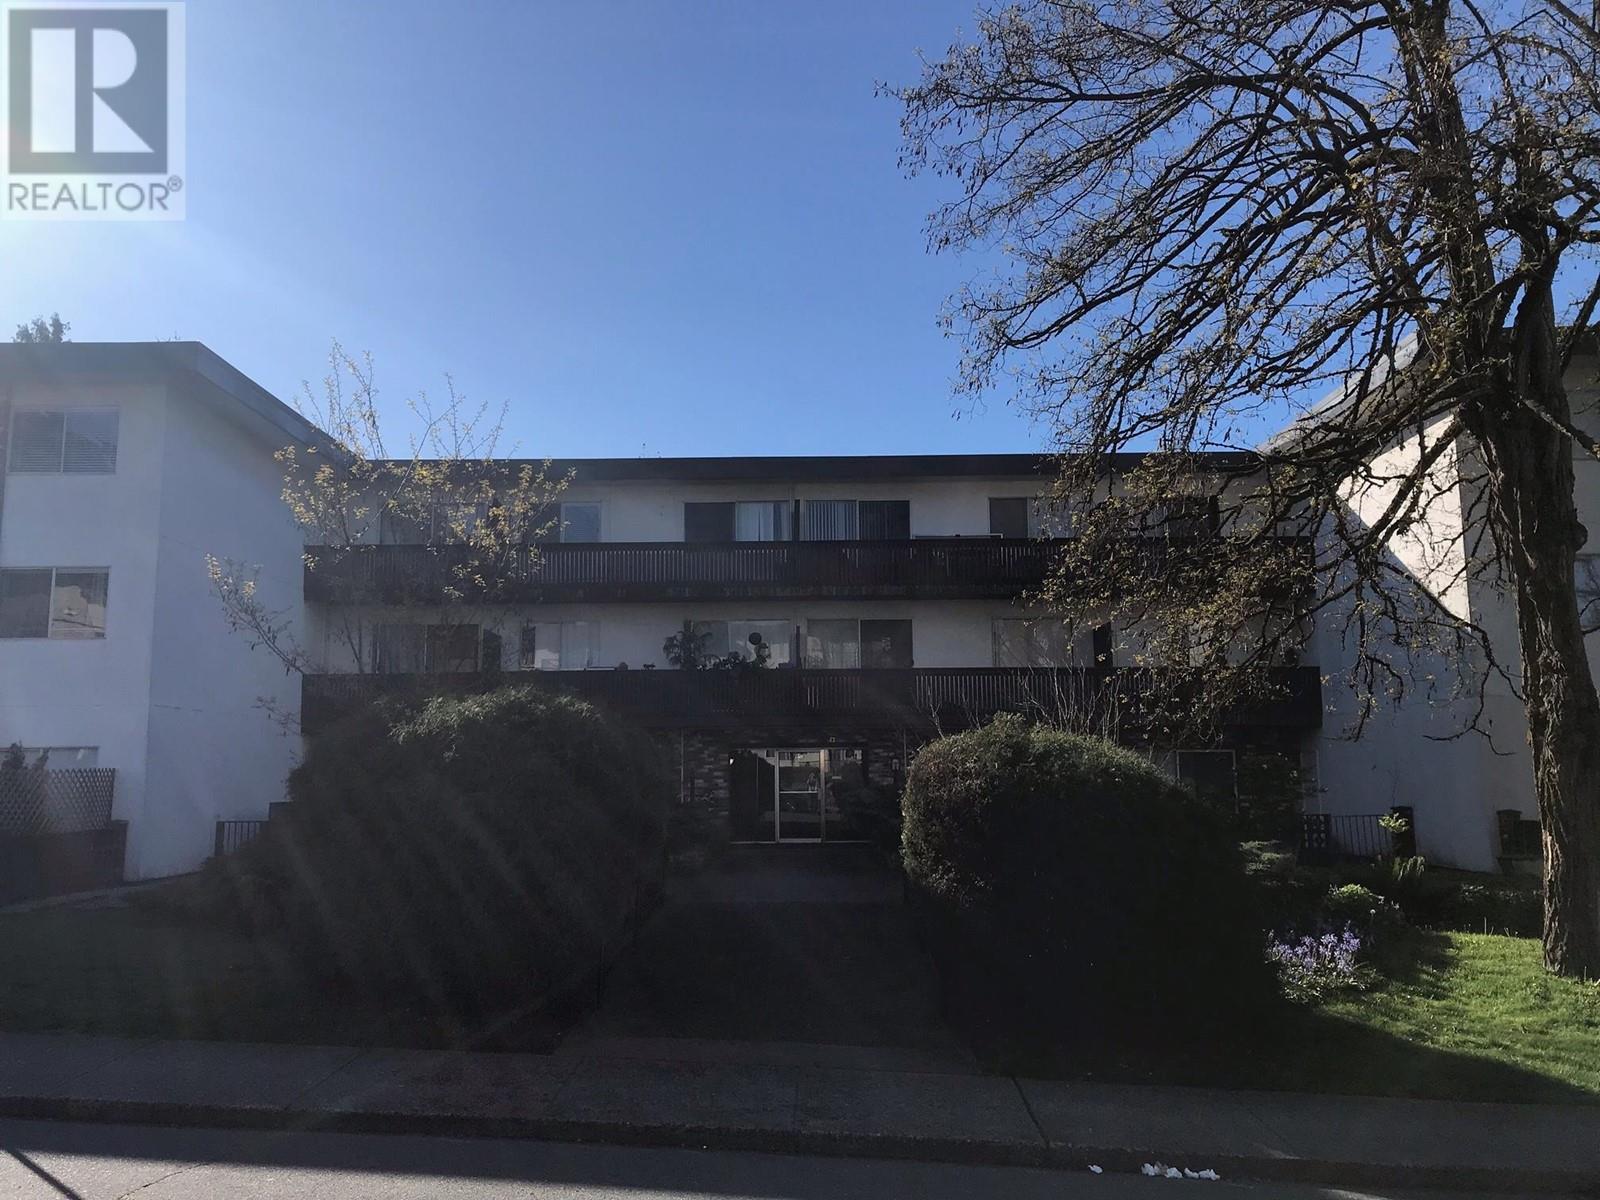 313 910 FIFTH AVENUE, new westminster, British Columbia